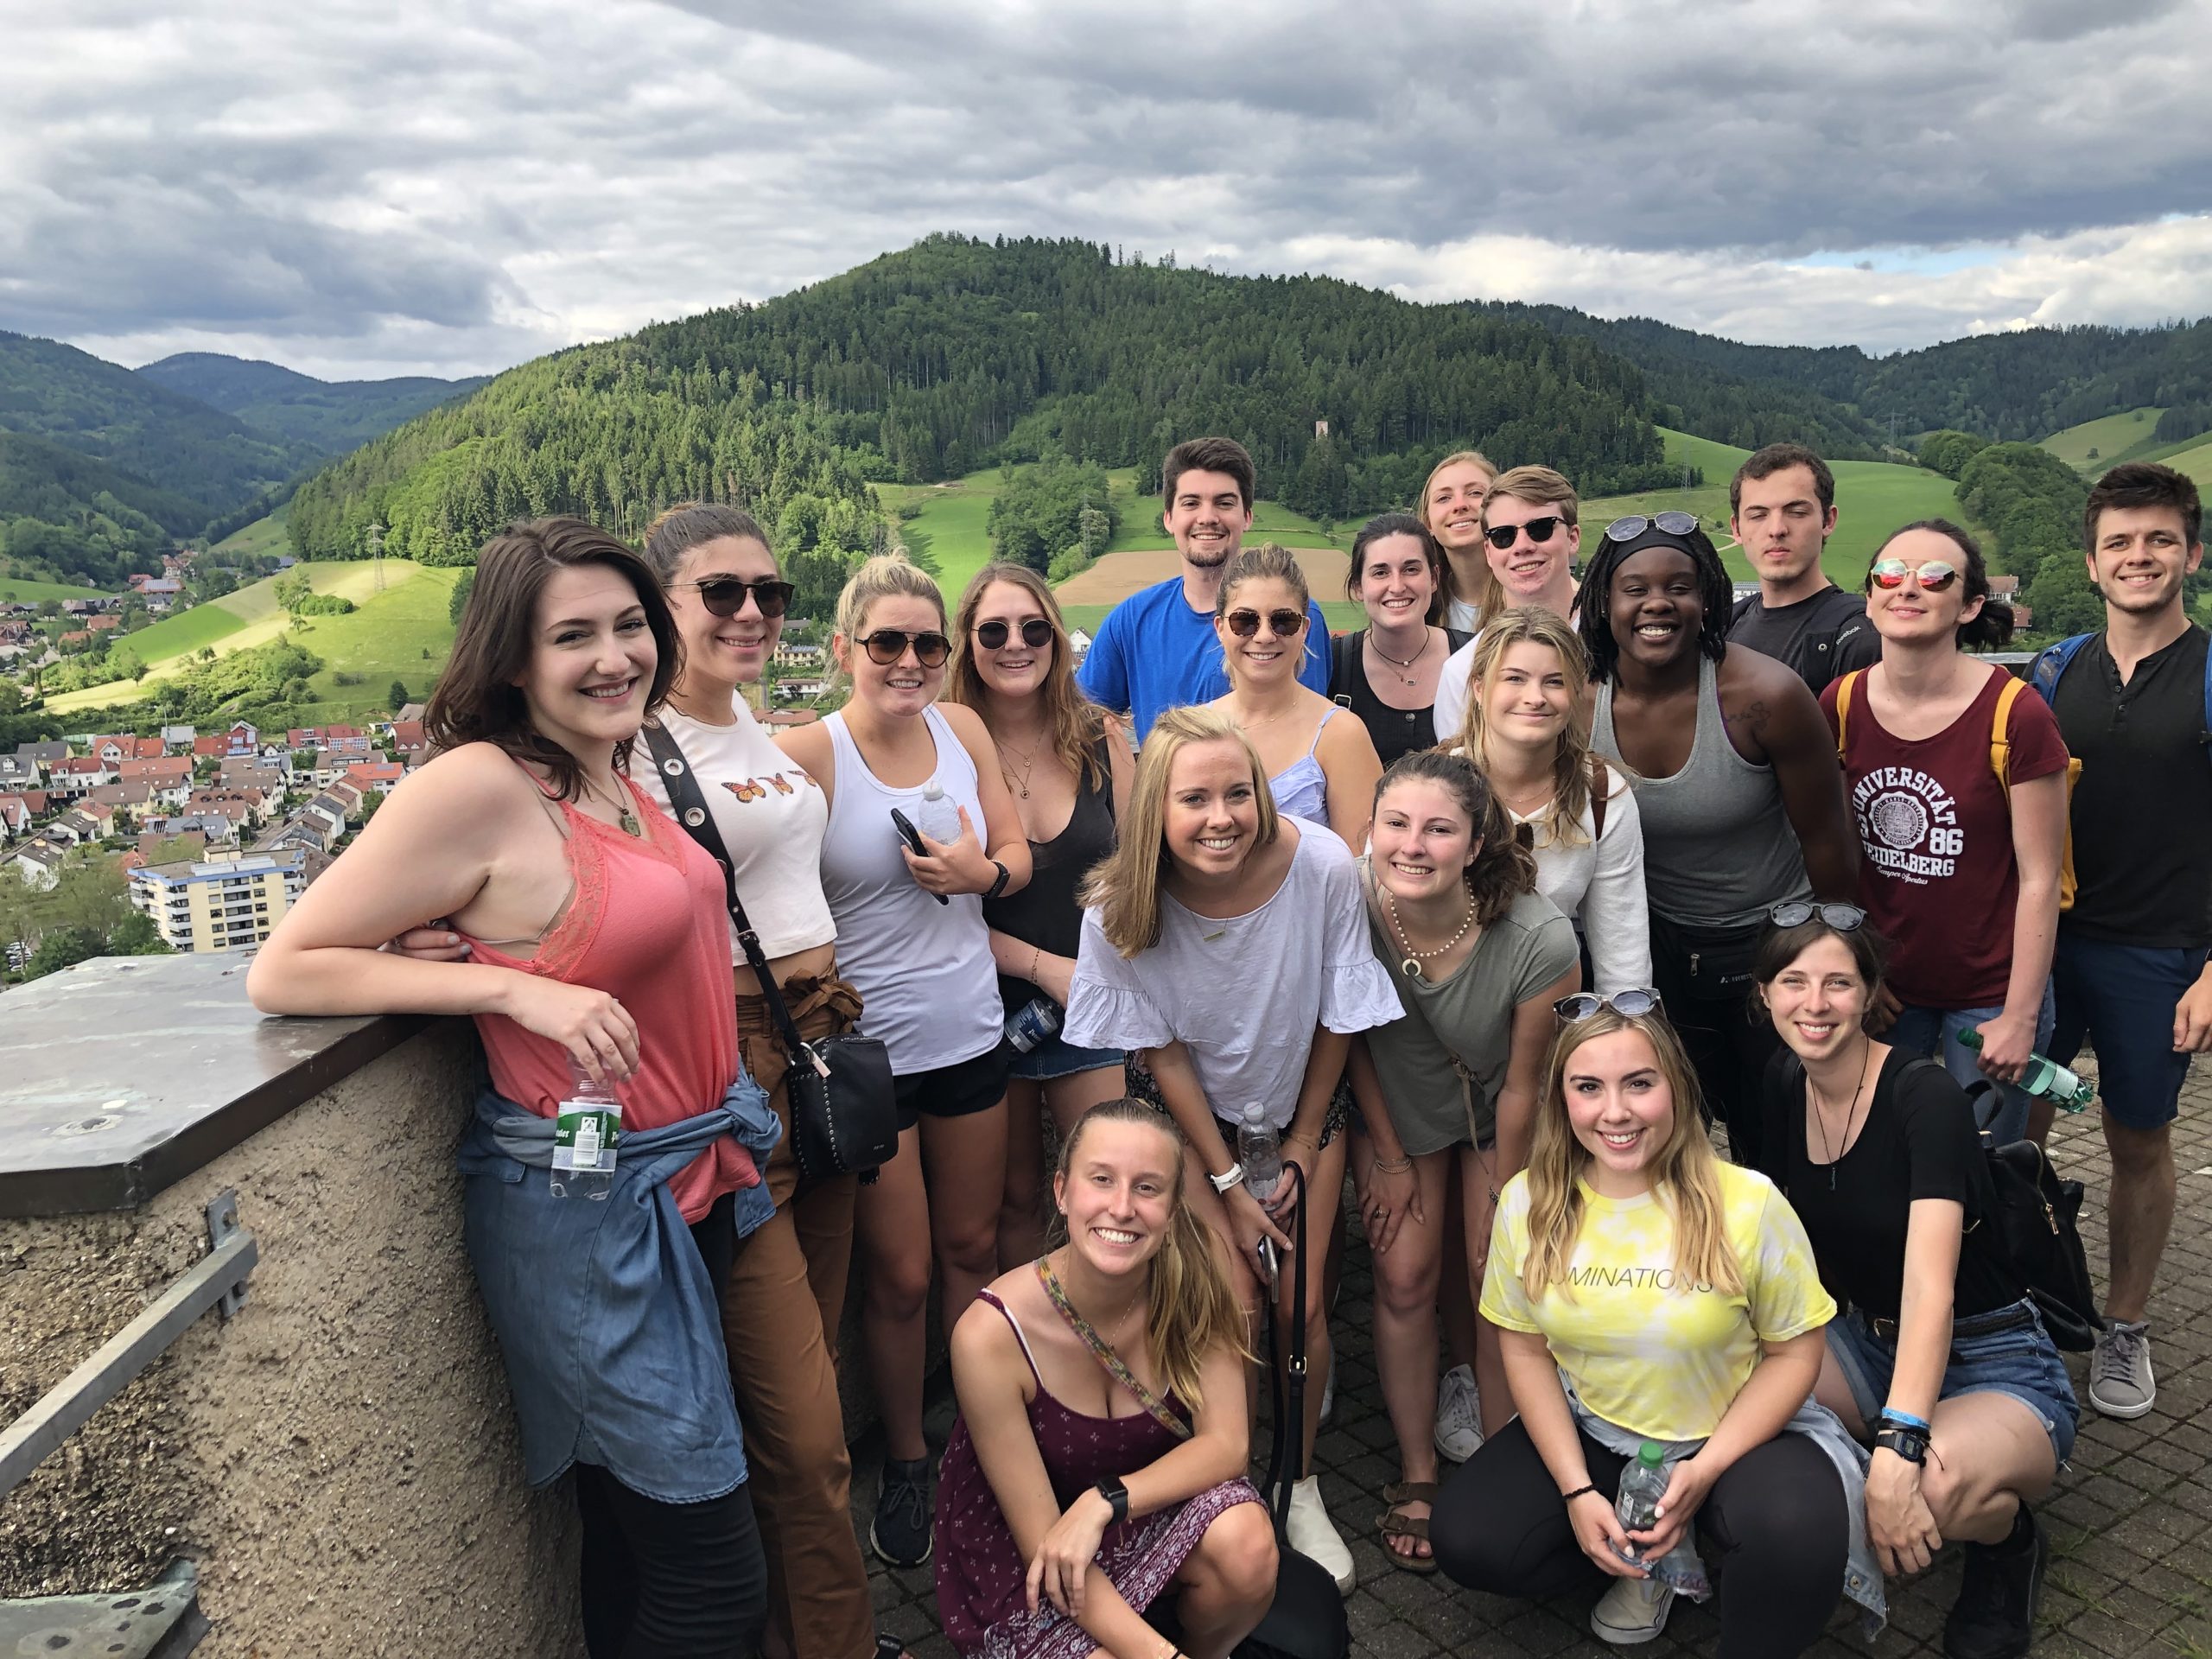 Students in the Rhine smiling